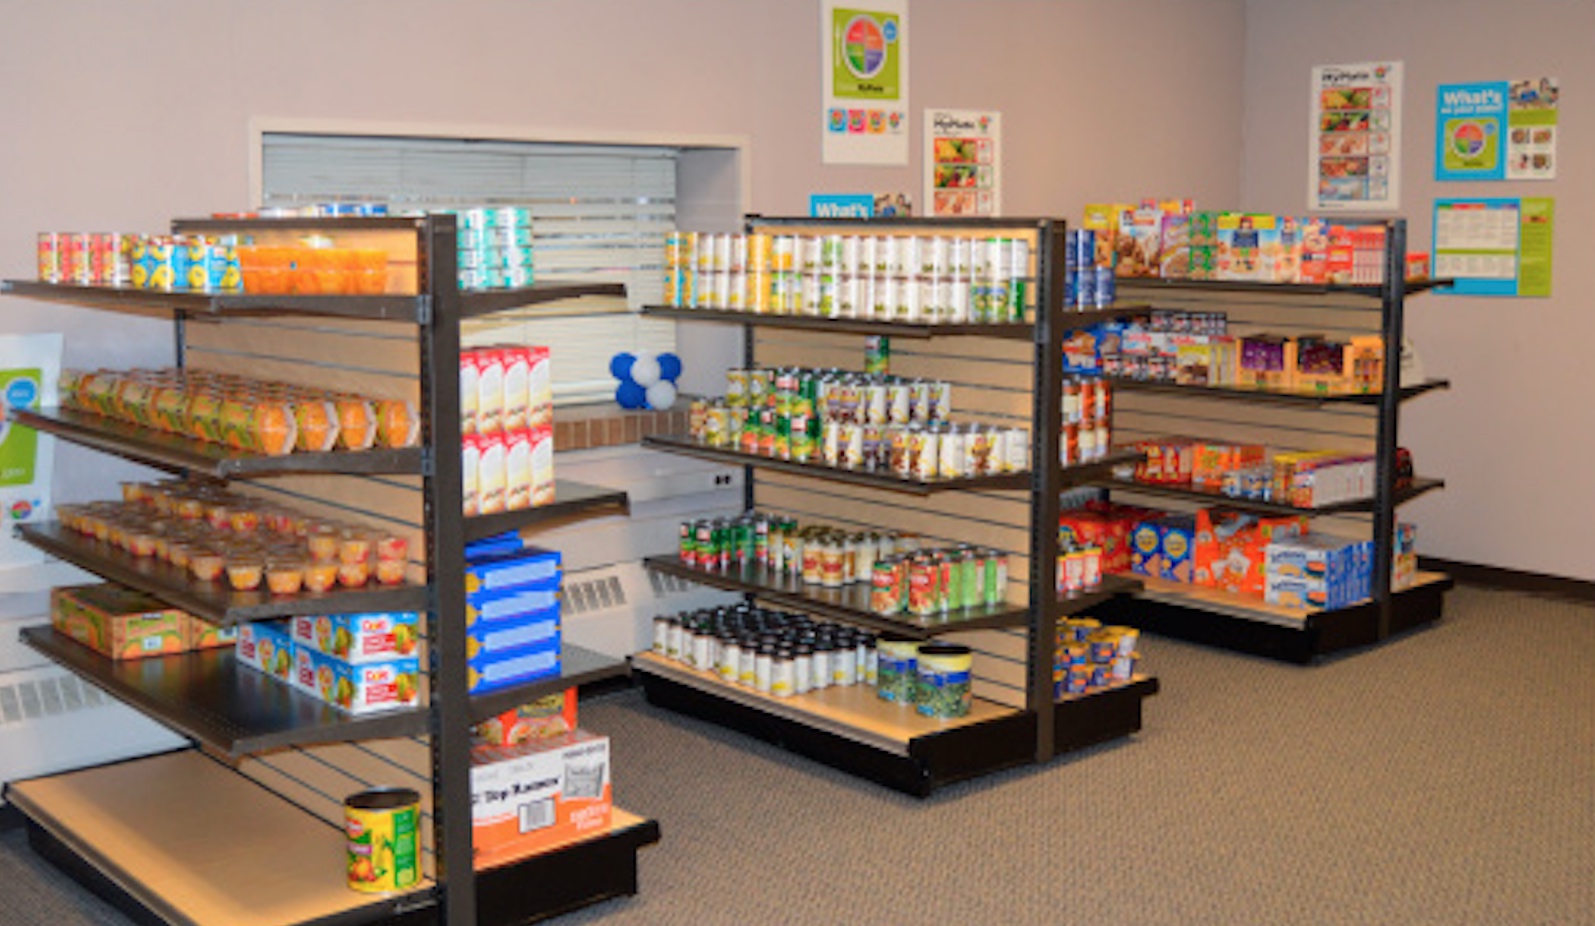 Photo shows the interior of the Hawks' Nest food pantry with shelves of food